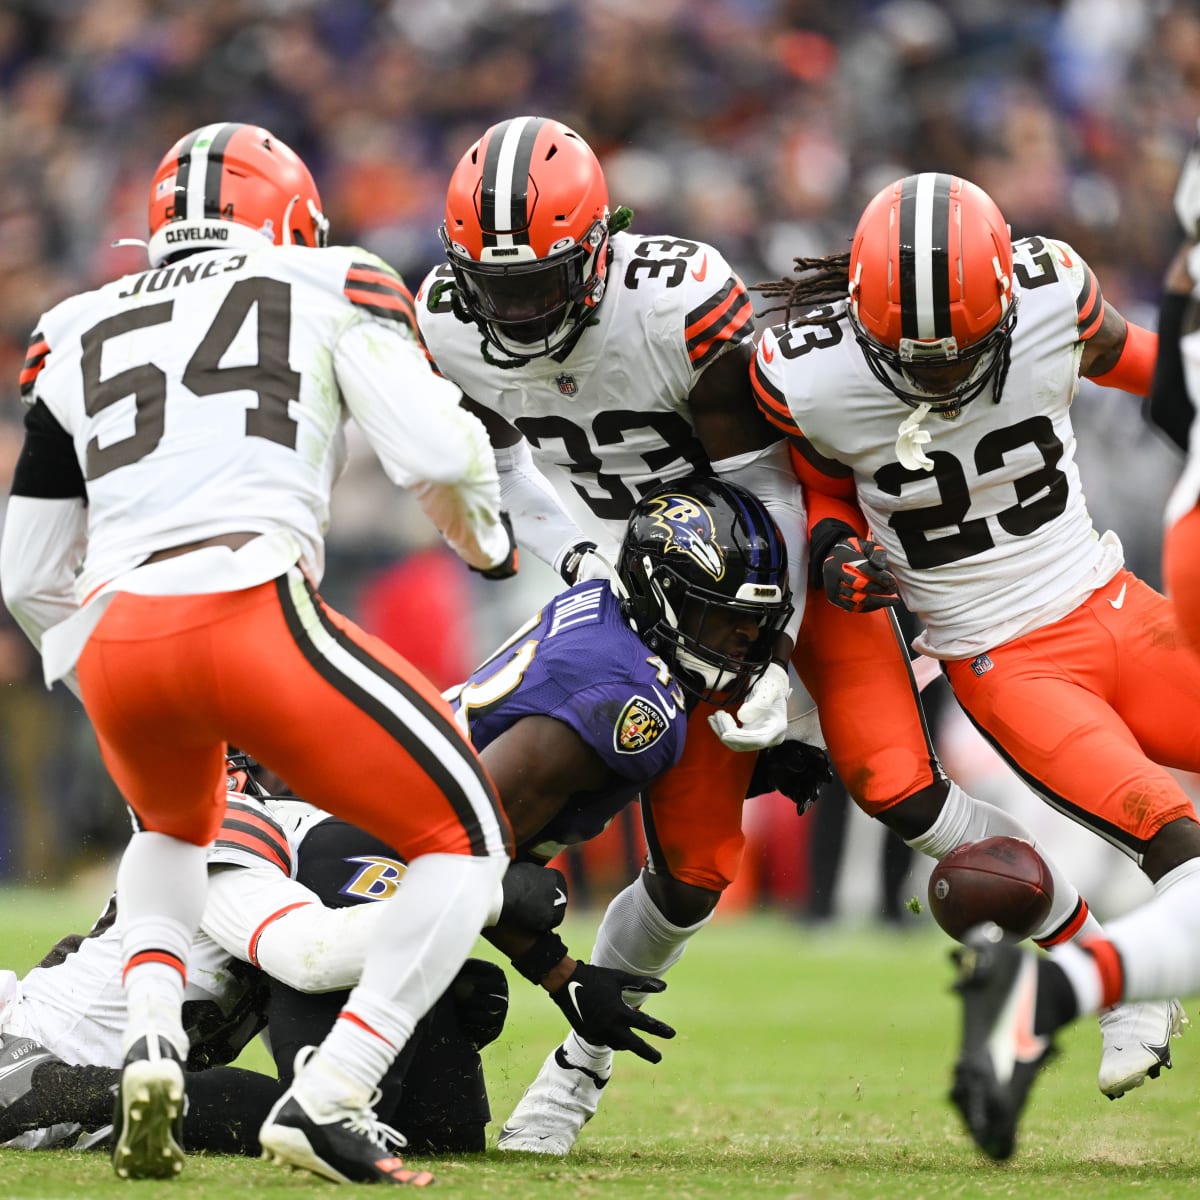 Ravens will face Browns on Saturday, Dec. 17, at 4:30 p.m. as part